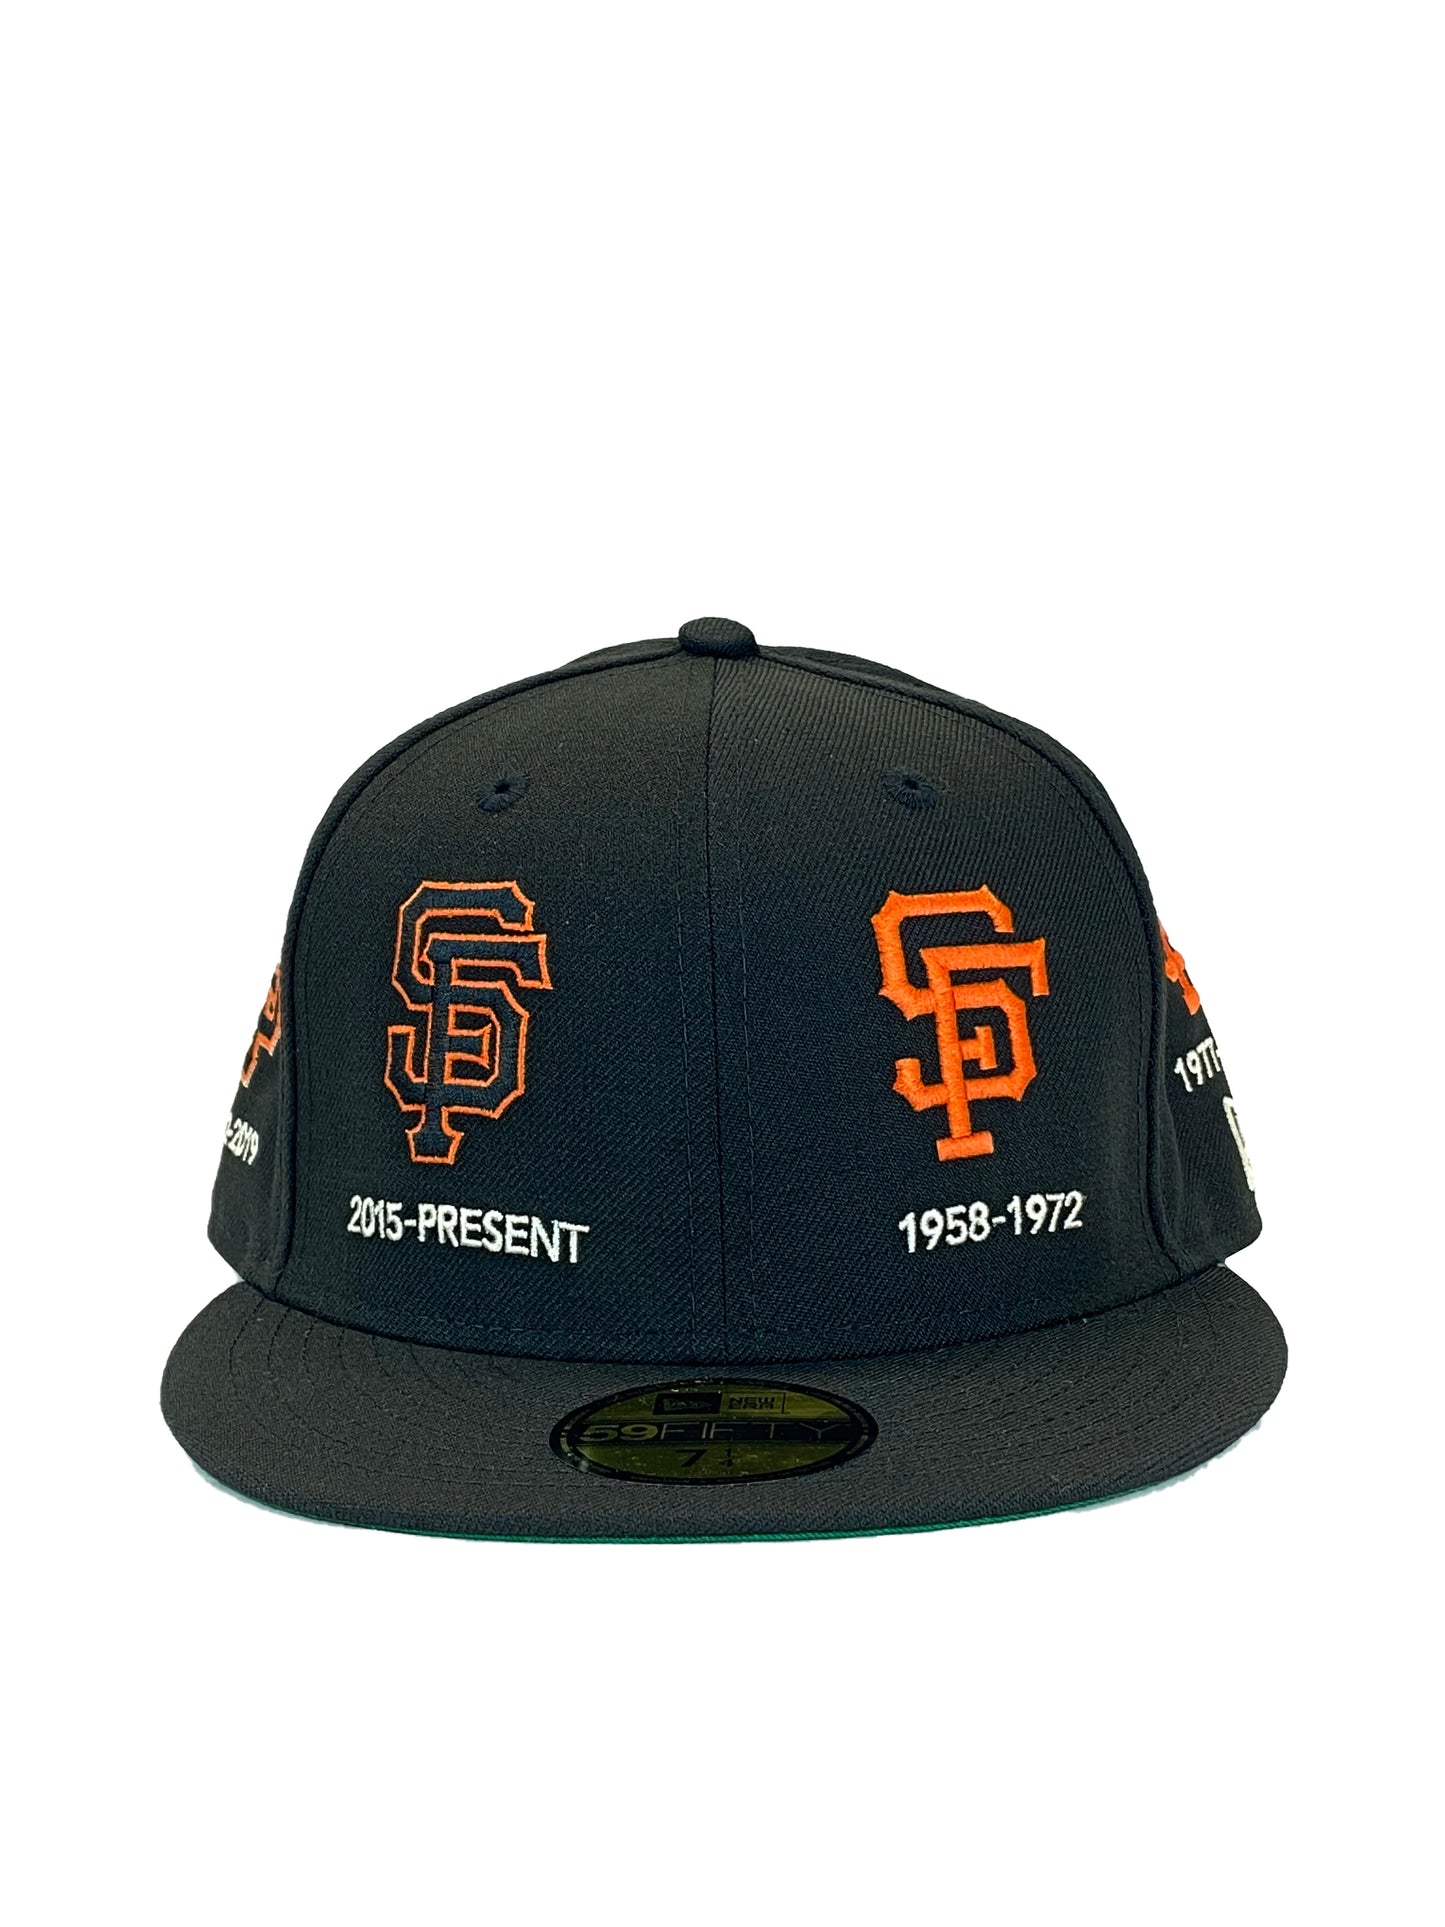 SAN FRANCISCO GIANTS LIFE QUARTER 59FIFTY FITTED